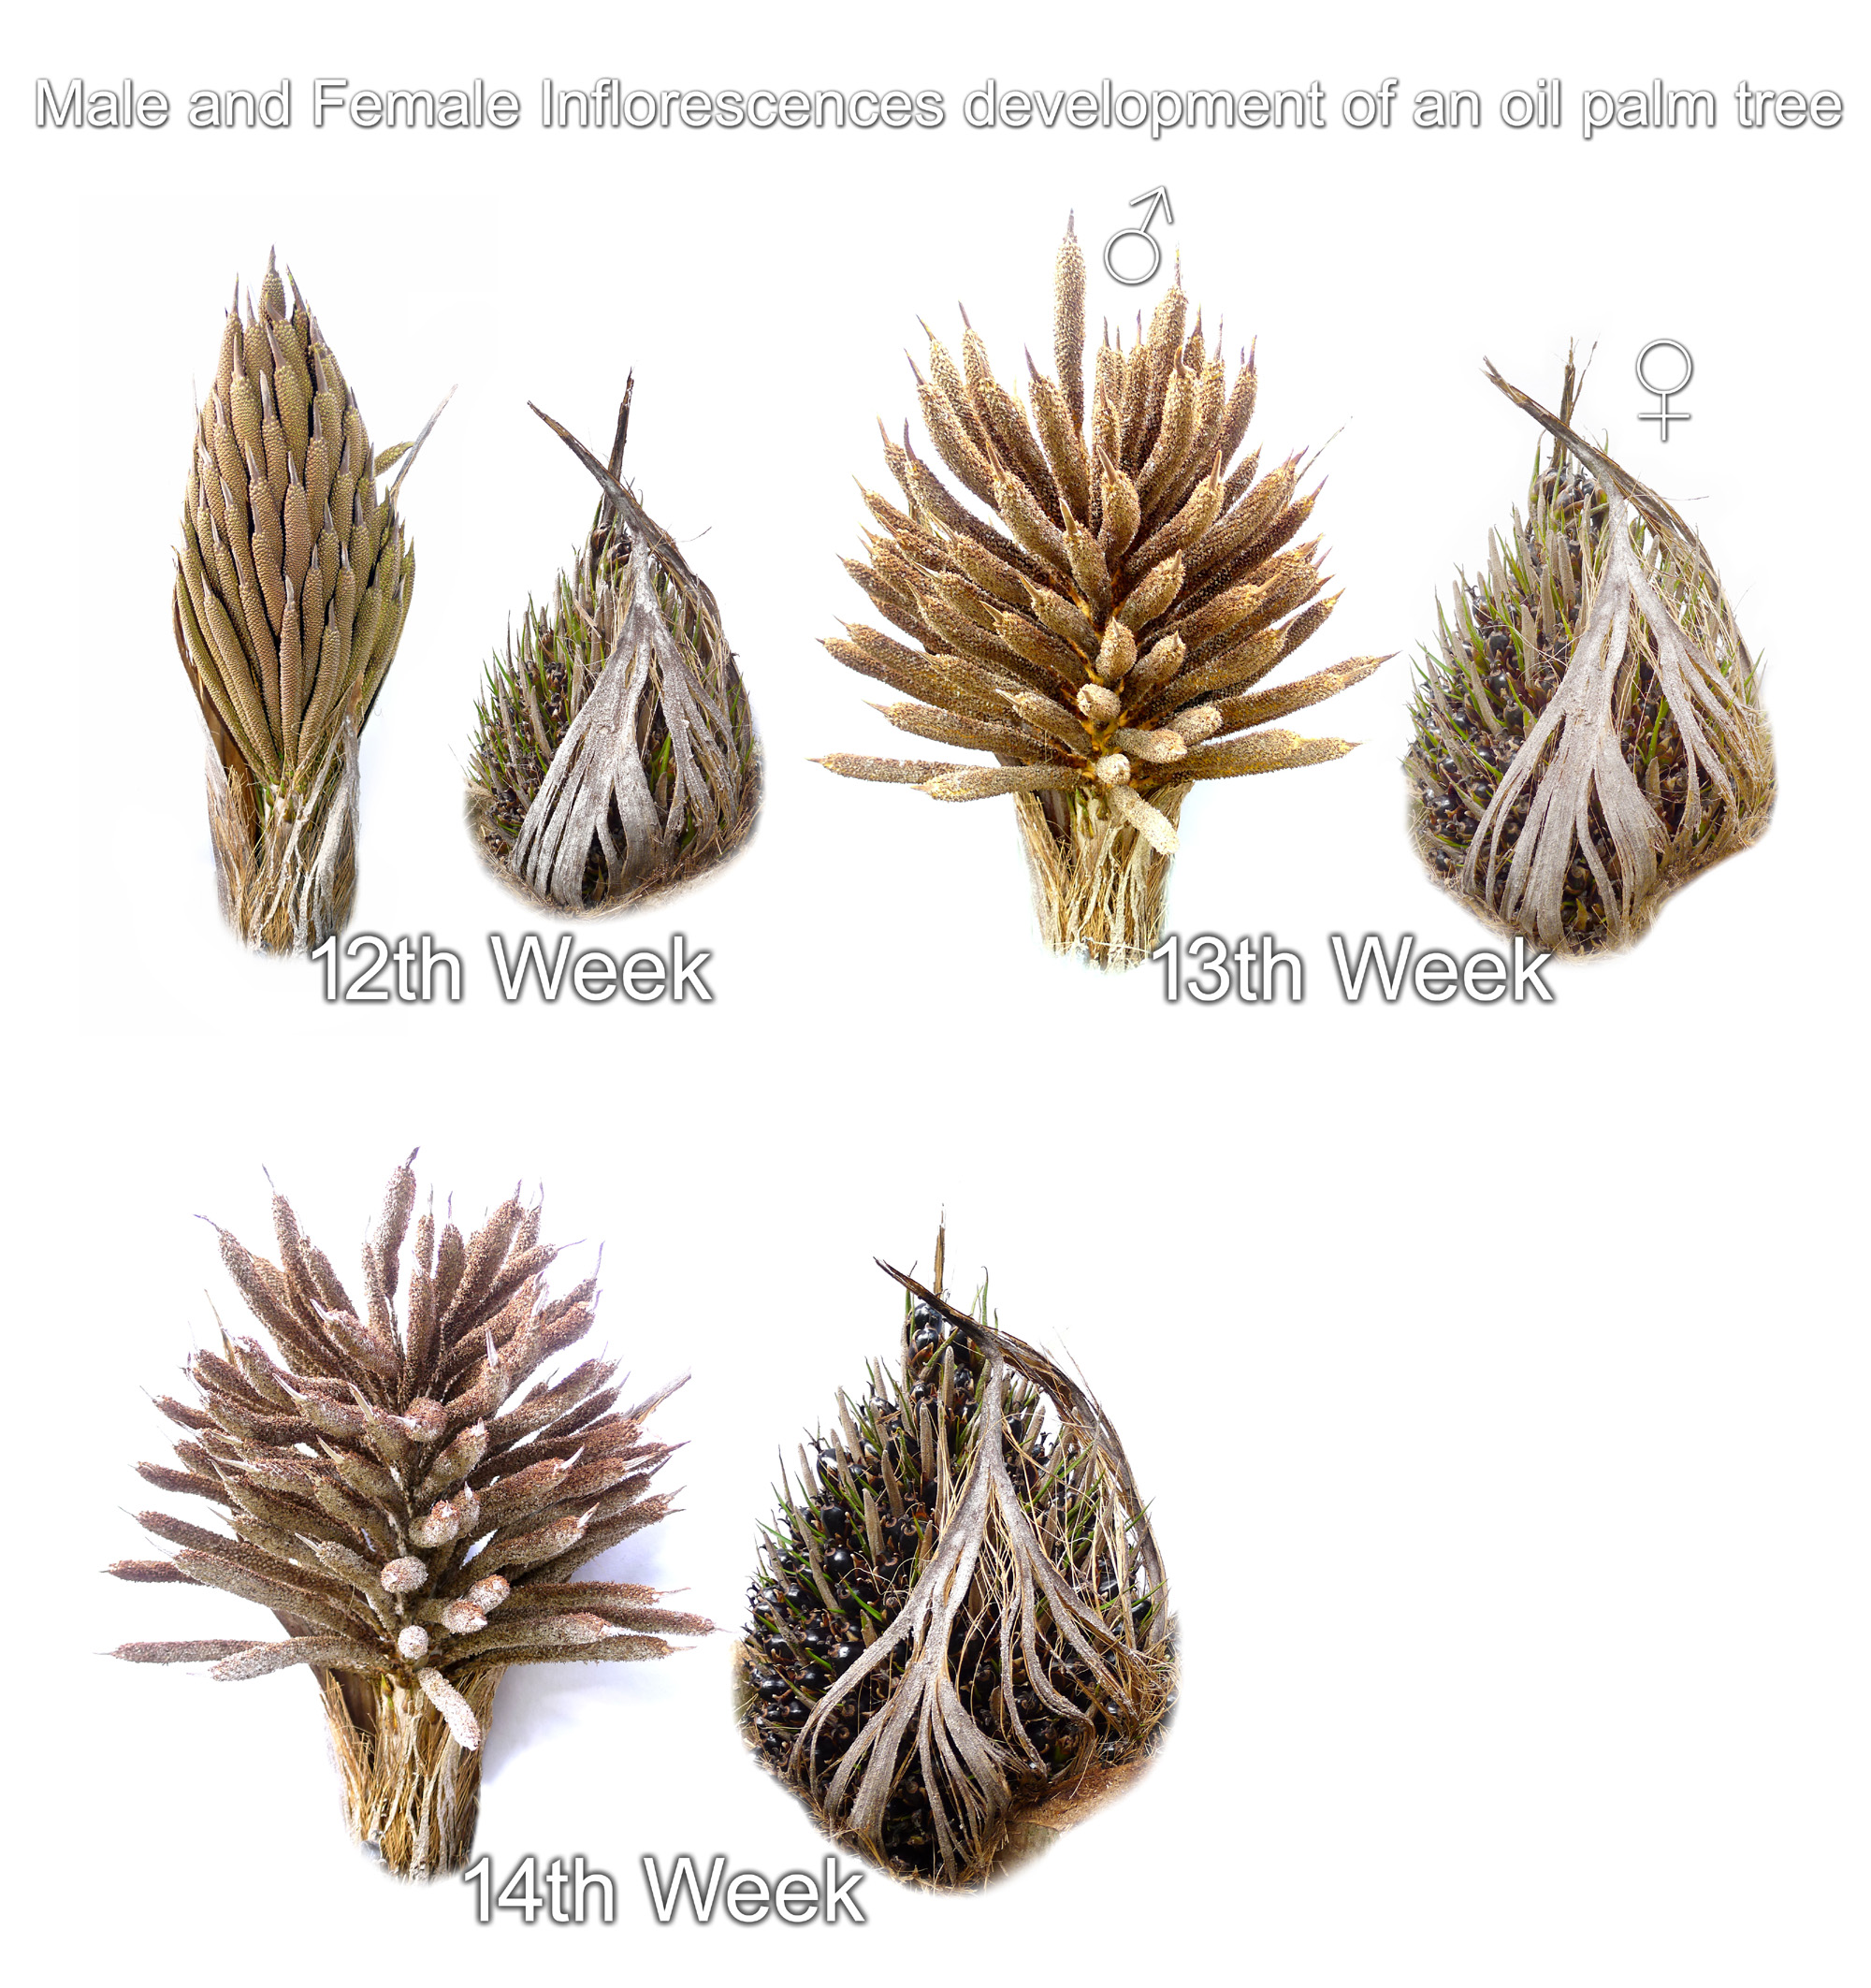 Male and Female Oil Palm flower Inflorescence Development